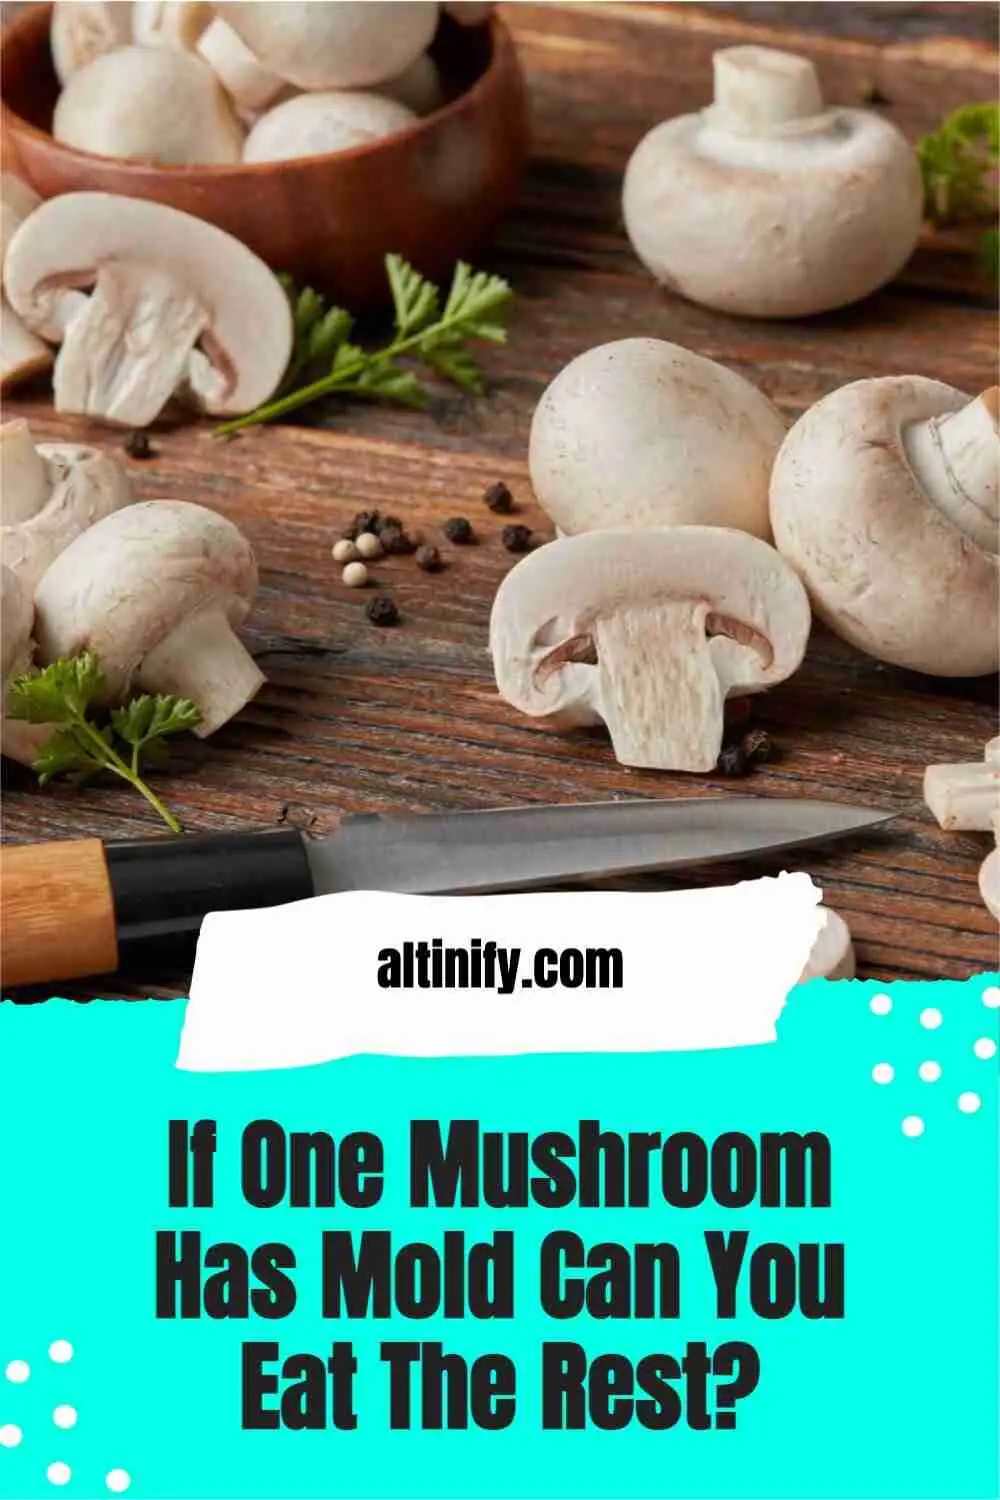 If One Mushroom Has Mold Can You Eat The Rest? (Here’s what experts say!)